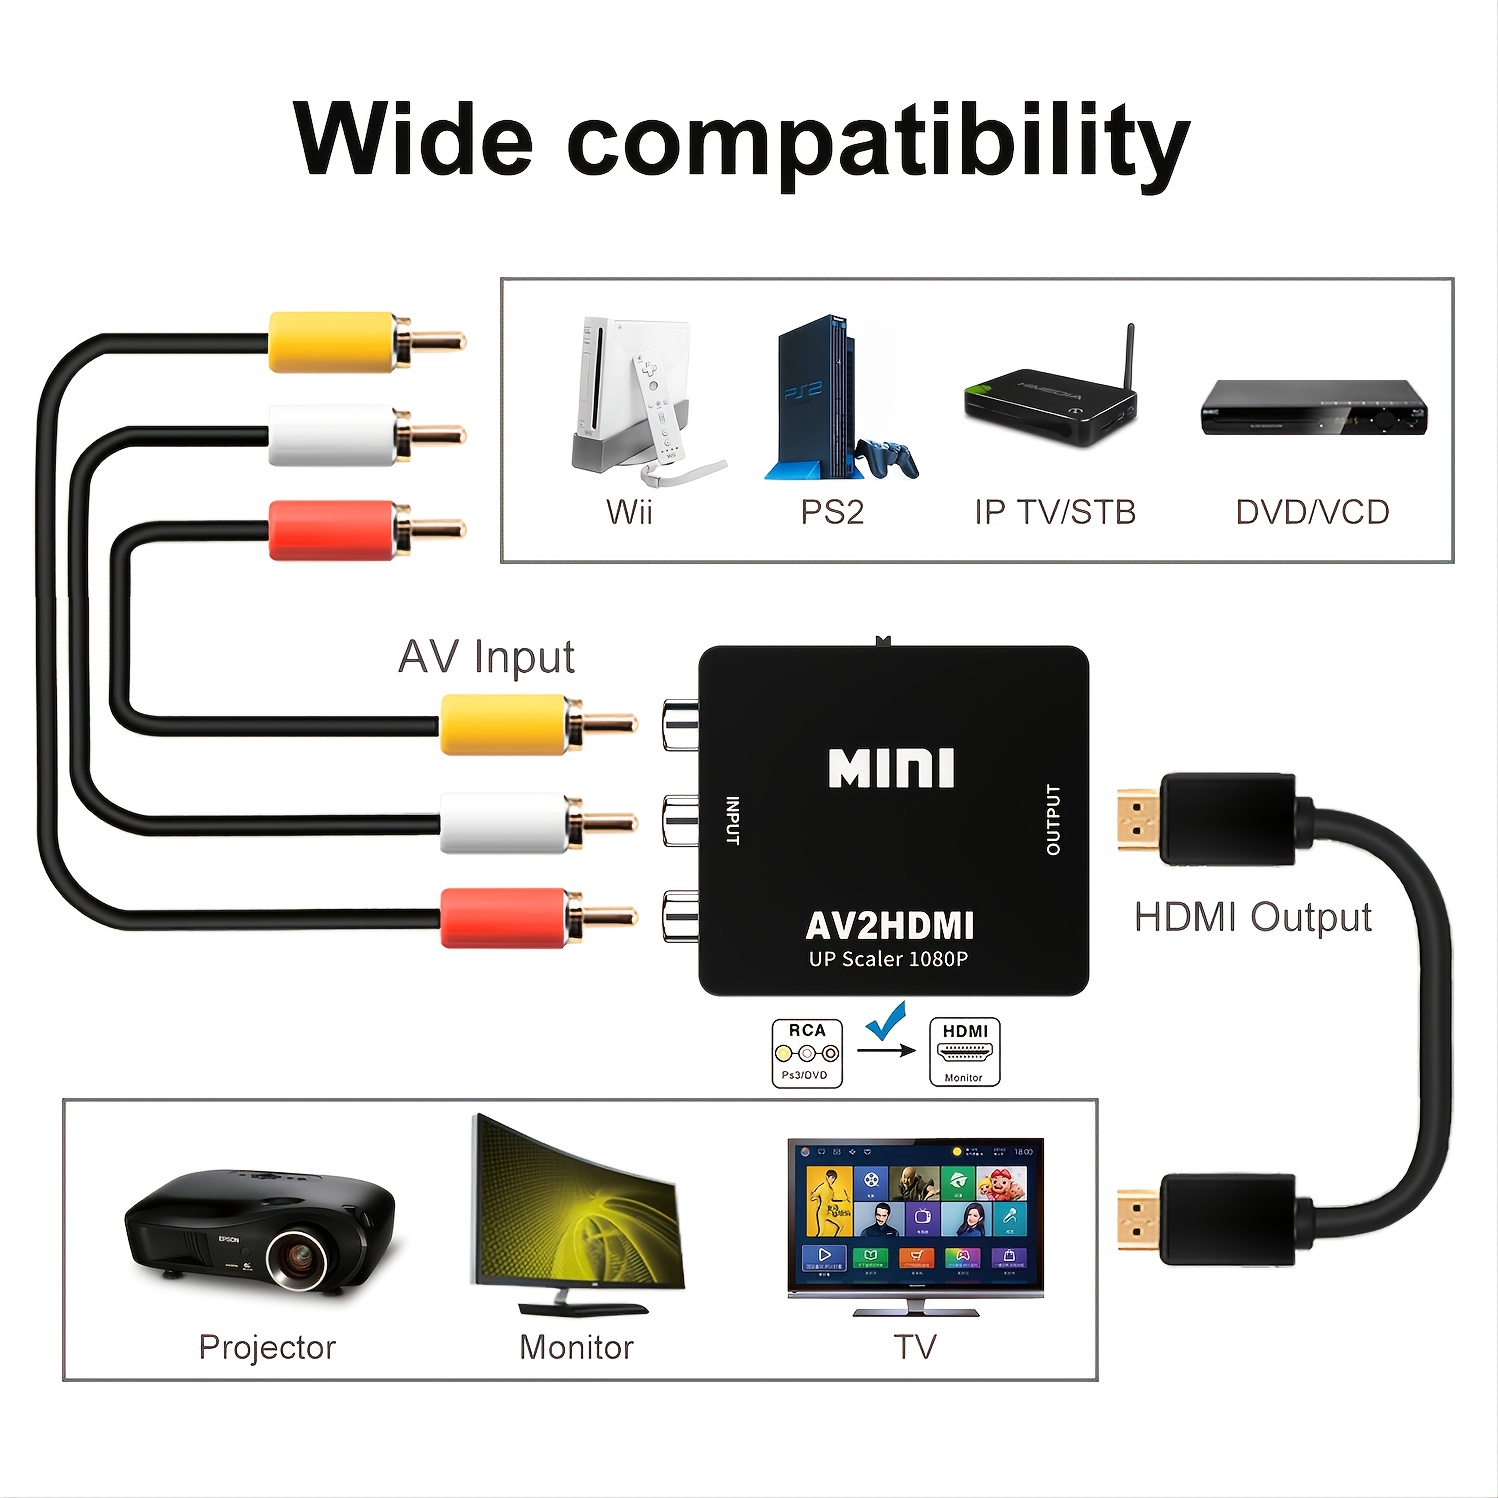 RCA to HDMI, AV to HDMI, 3RCA CVBS Composite Audio Video to 1080P HDMI  Converter Adapter Supporting PAL/NTSC for PS3, TV, STB, VHS, VCR, PC,  Laptop